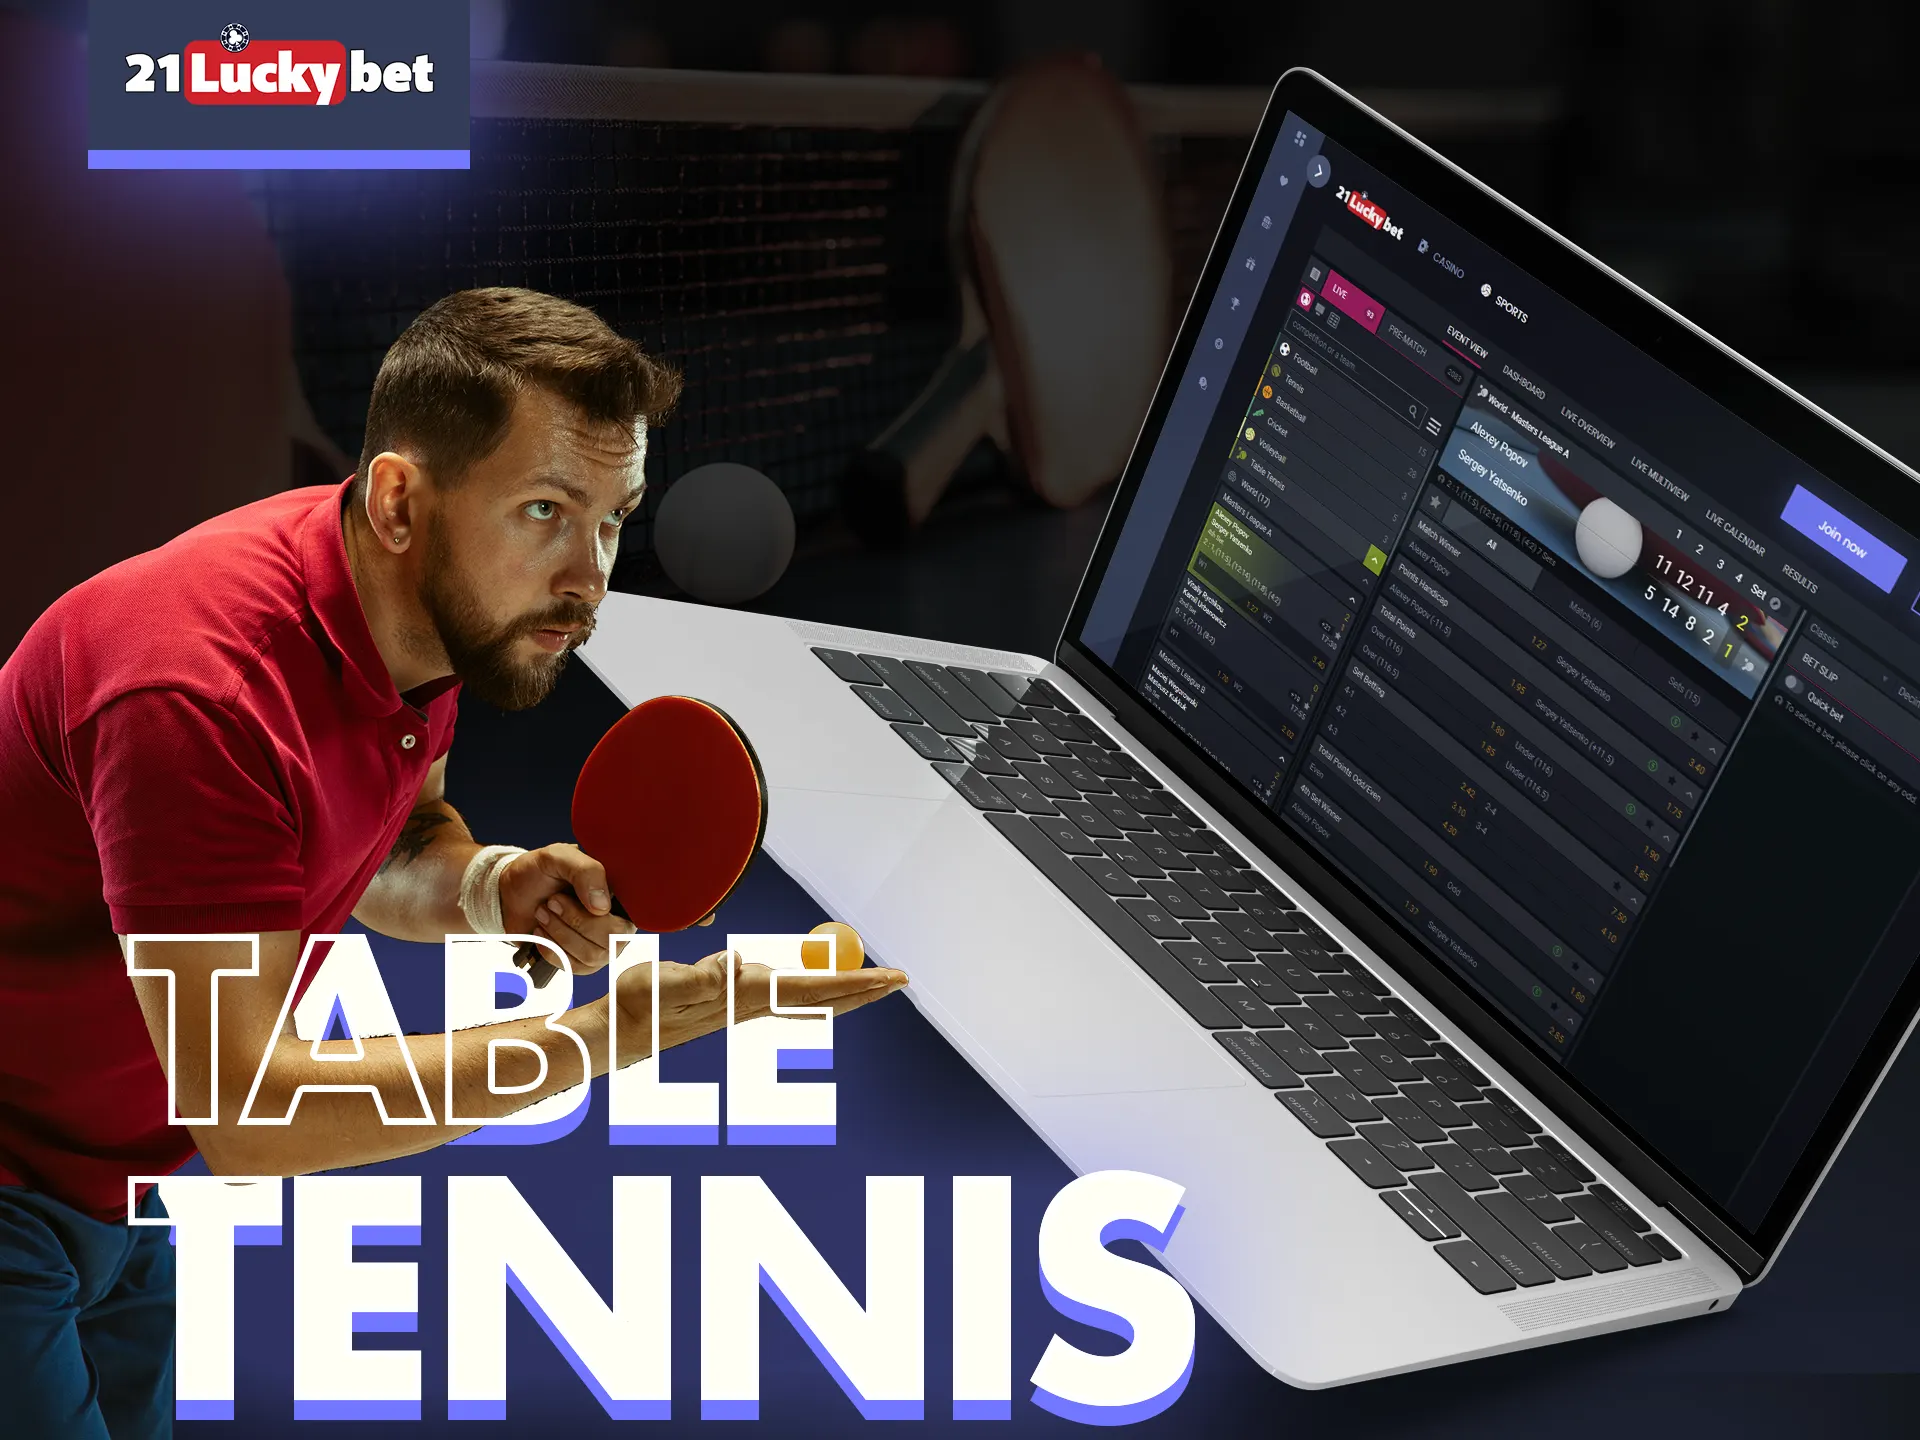 You can bet on table tennis games with 21luckybet.